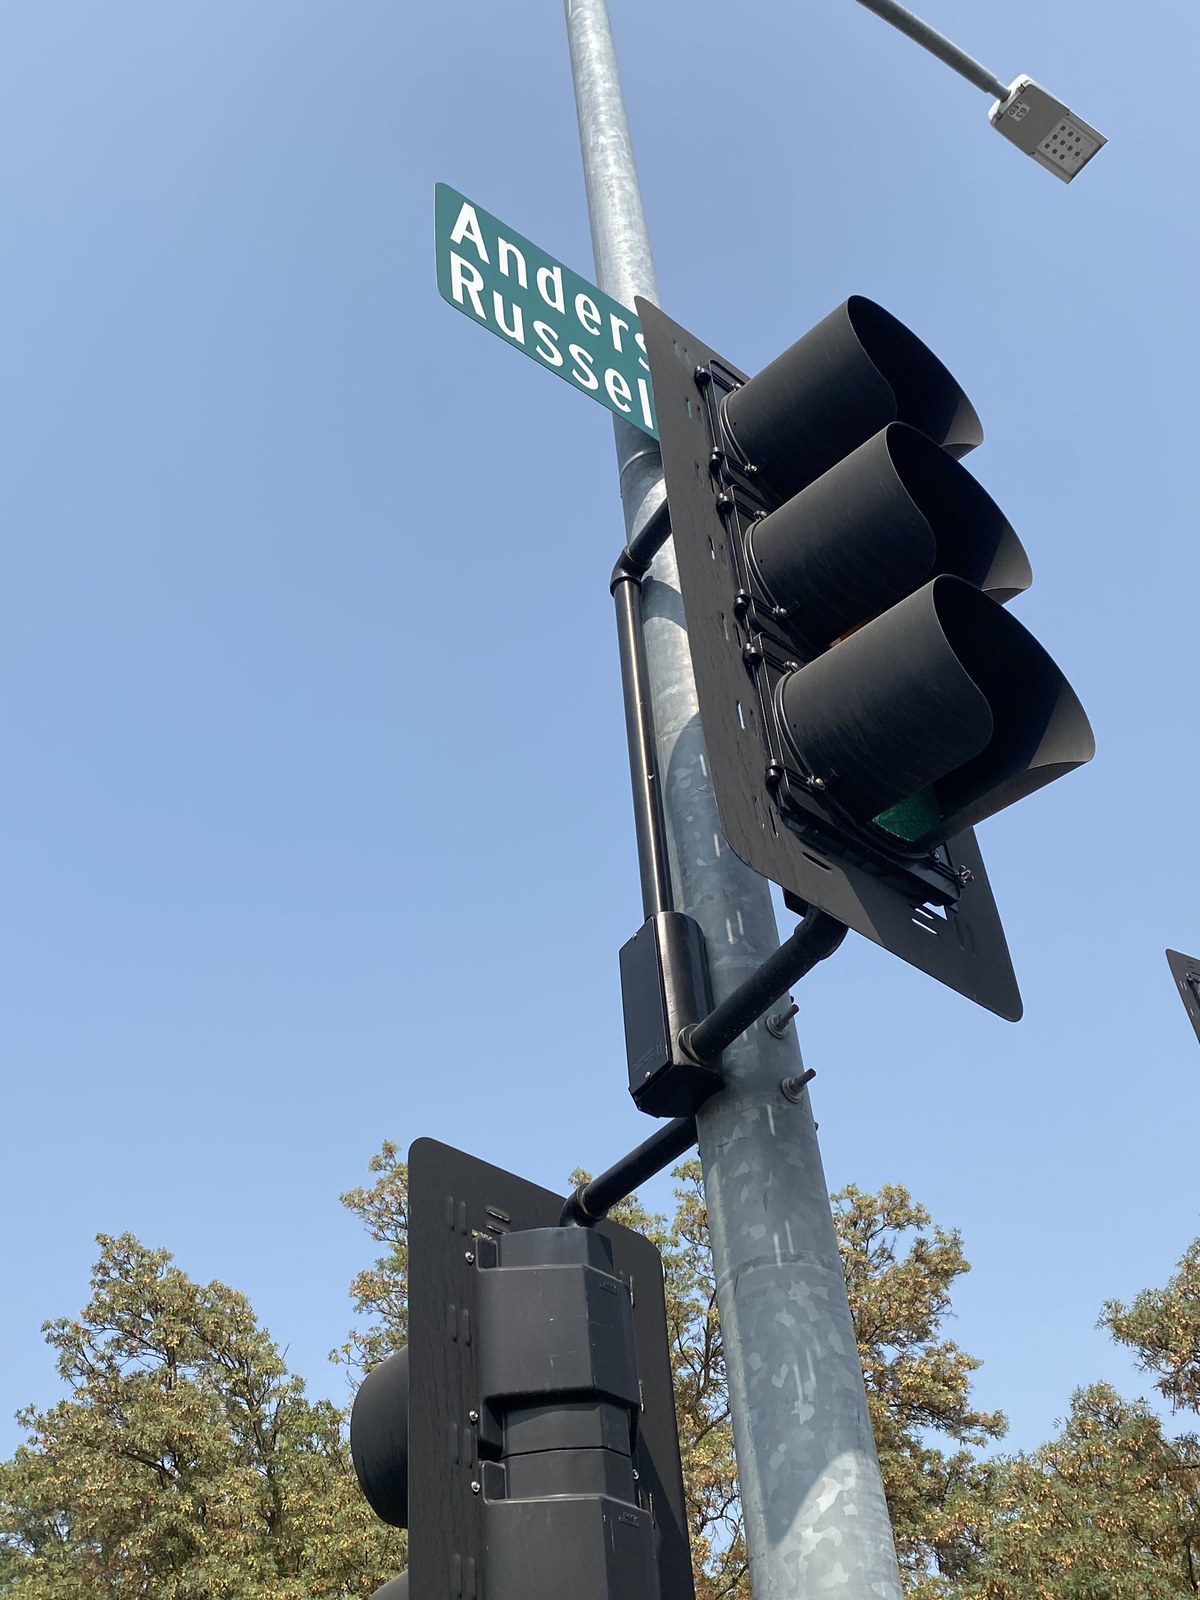 The stoplight at Anderson Road and Russell Boulevard